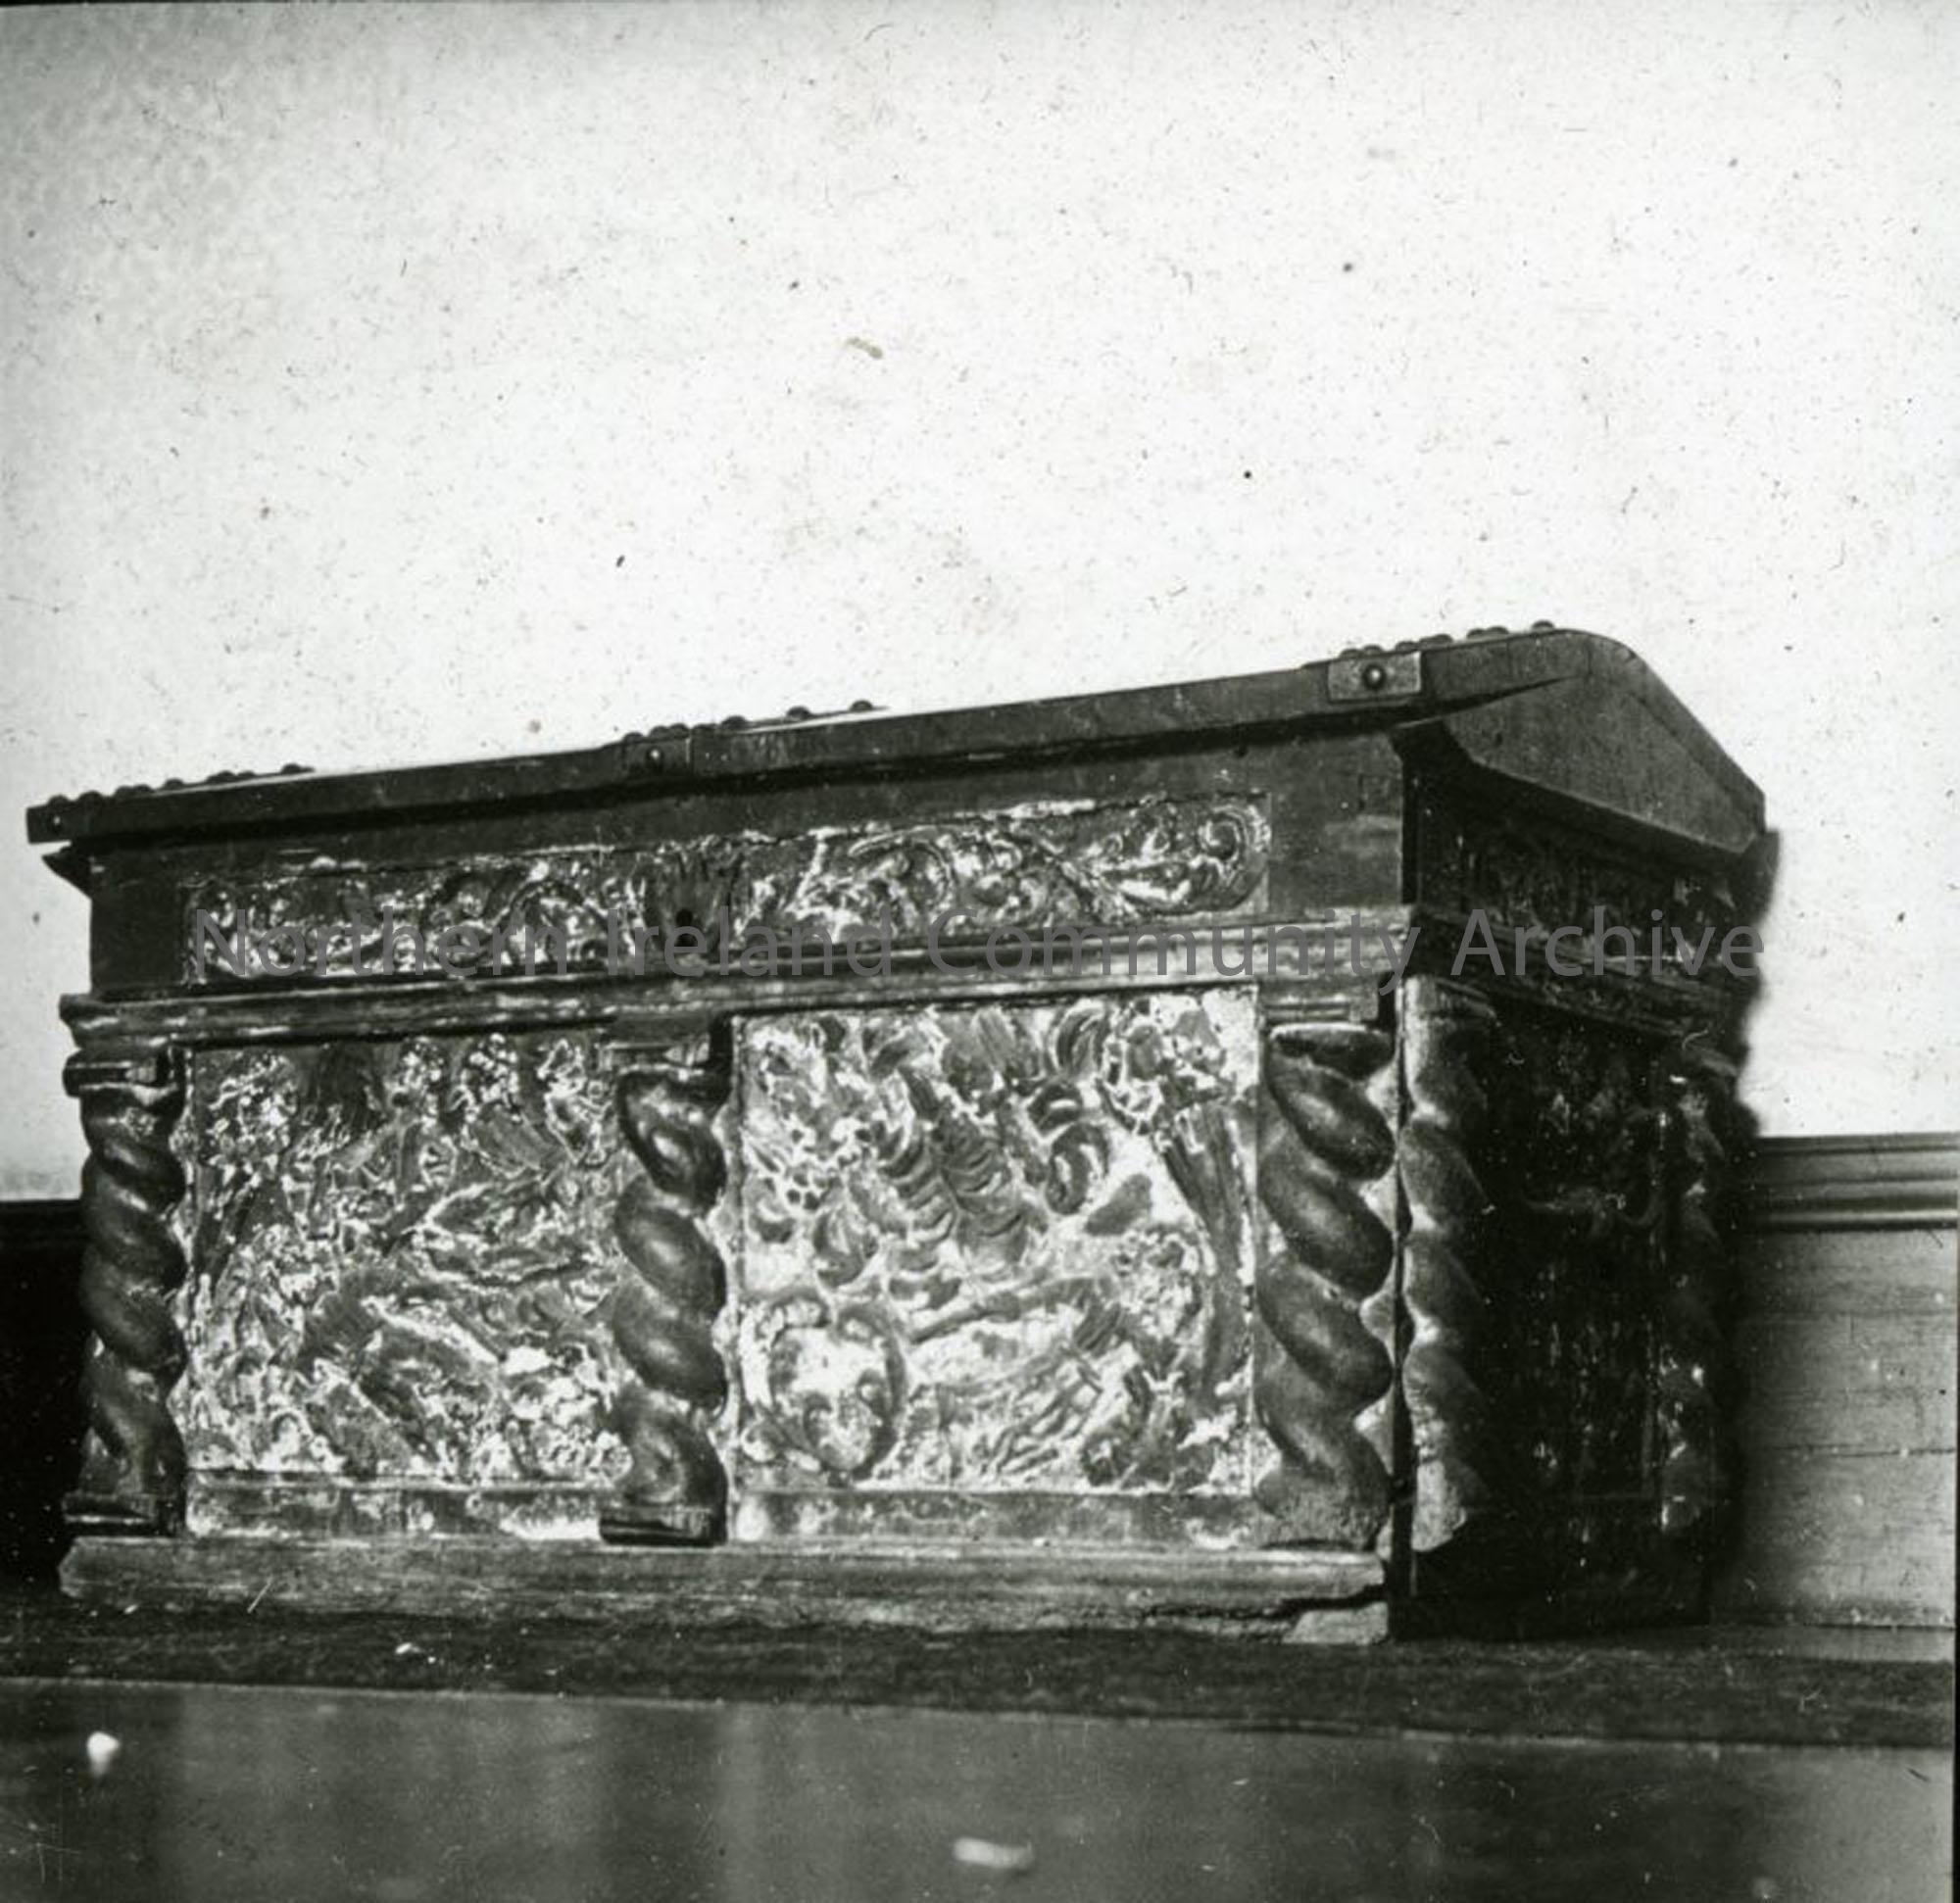 Spanish Armada Chest as titled by Sam Henry